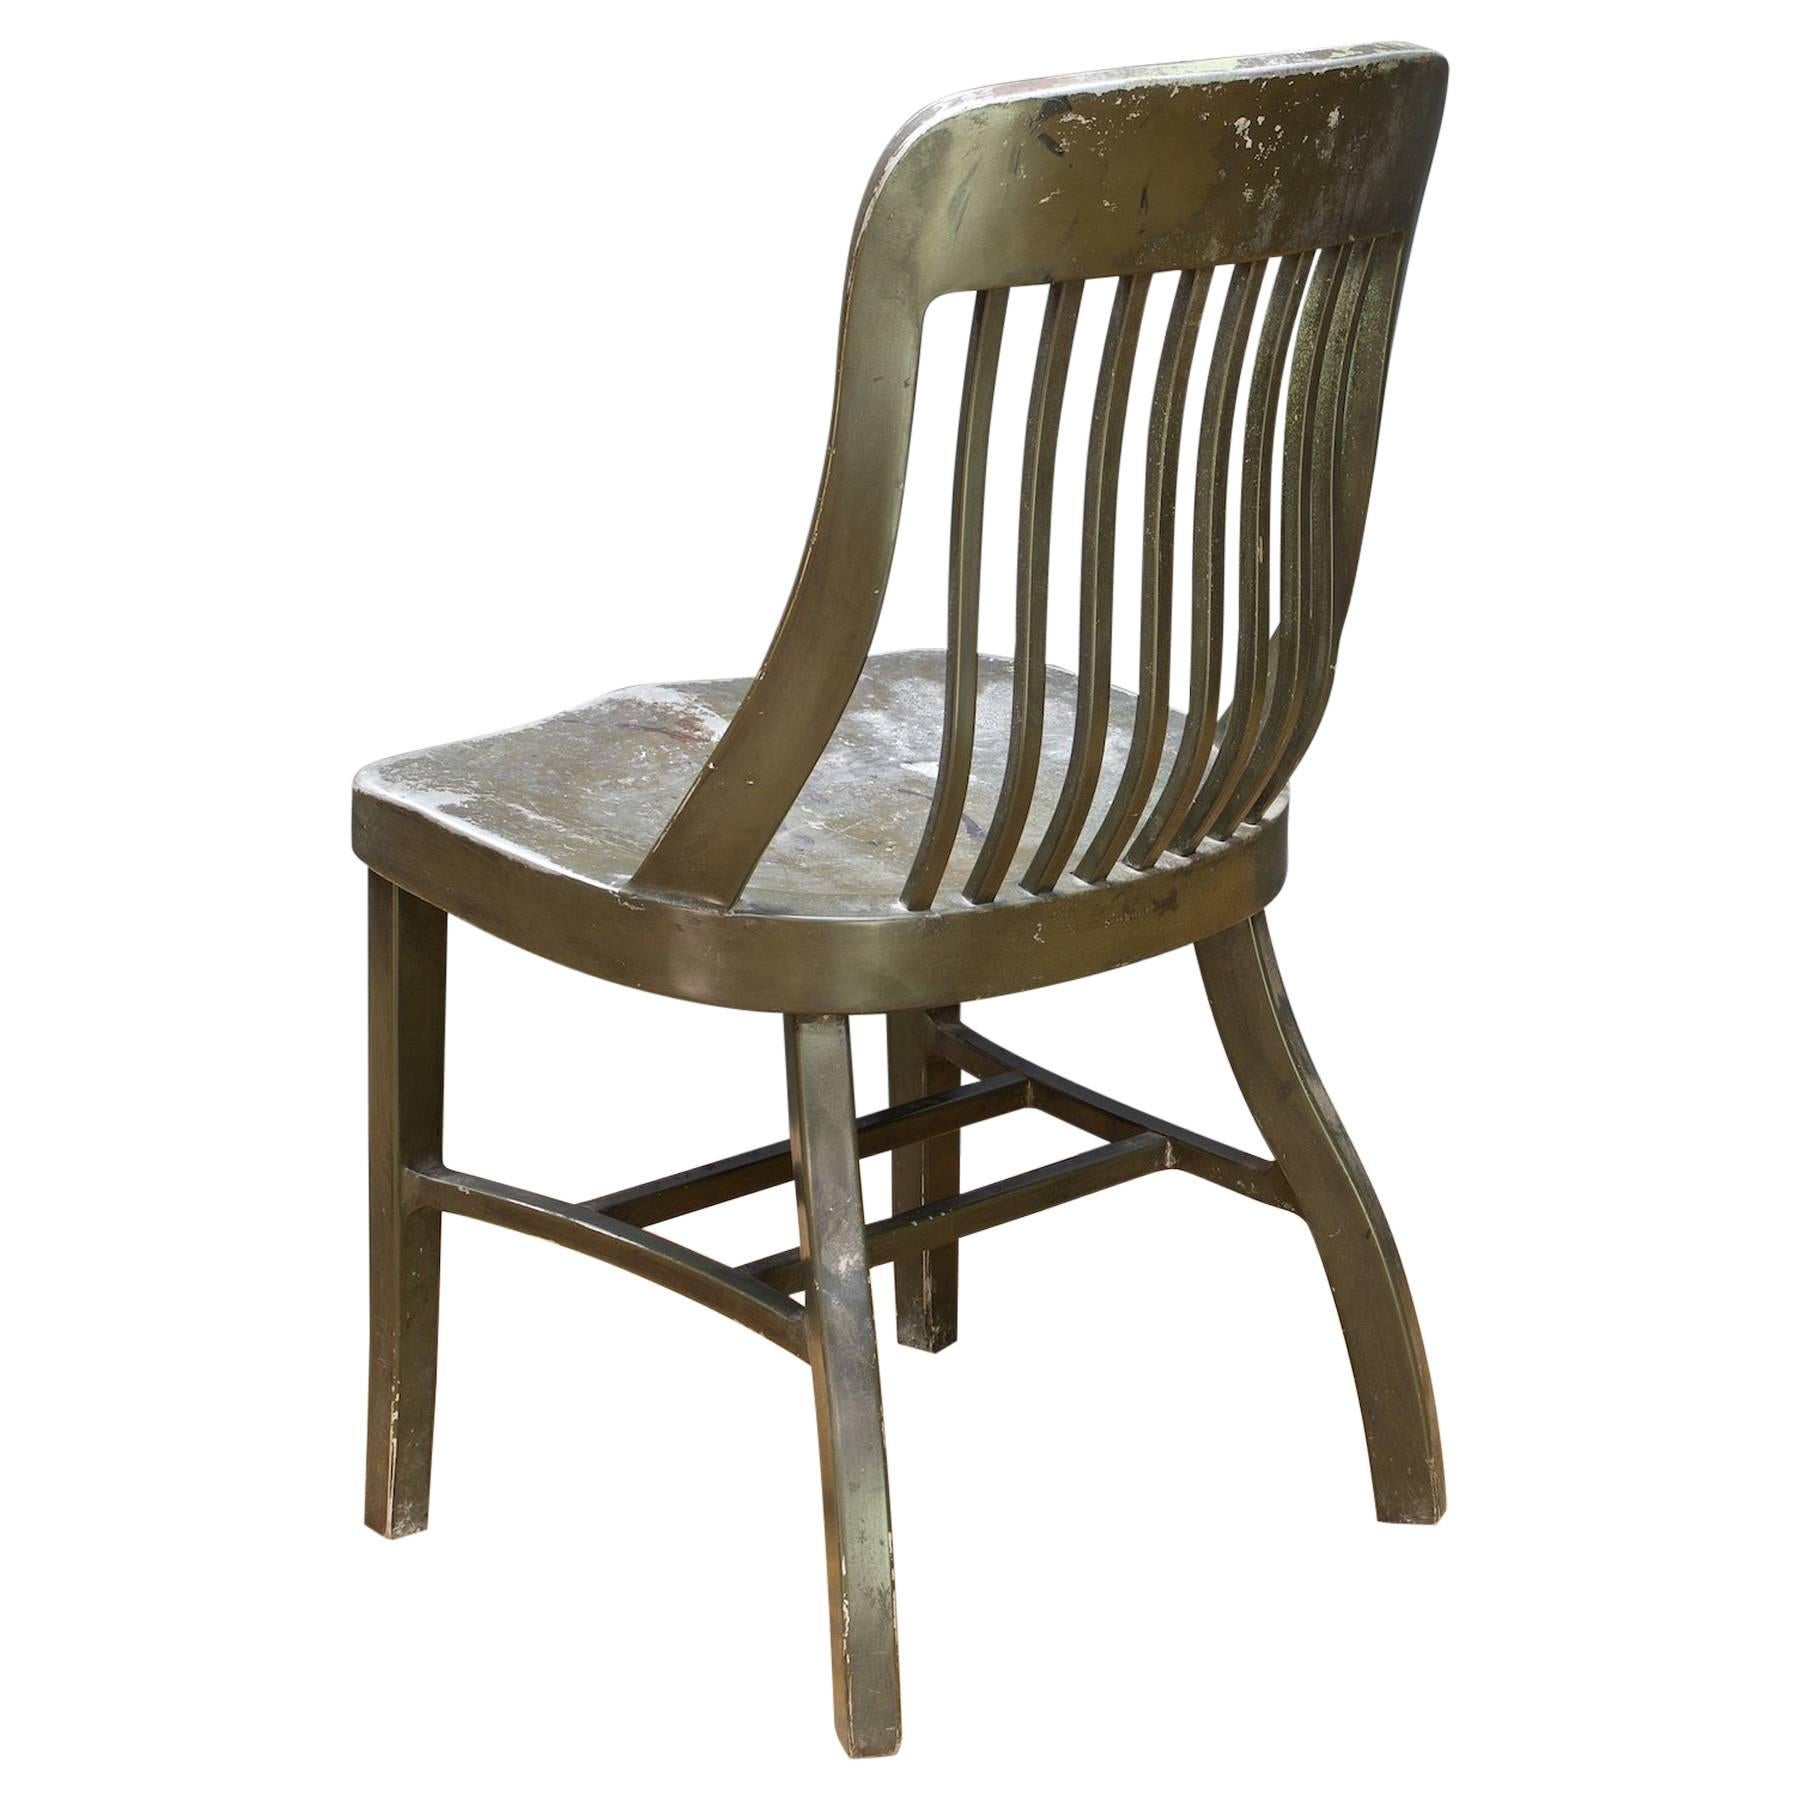 1930s US Barracks Metal Early Goodform Chair by General Fireproofing